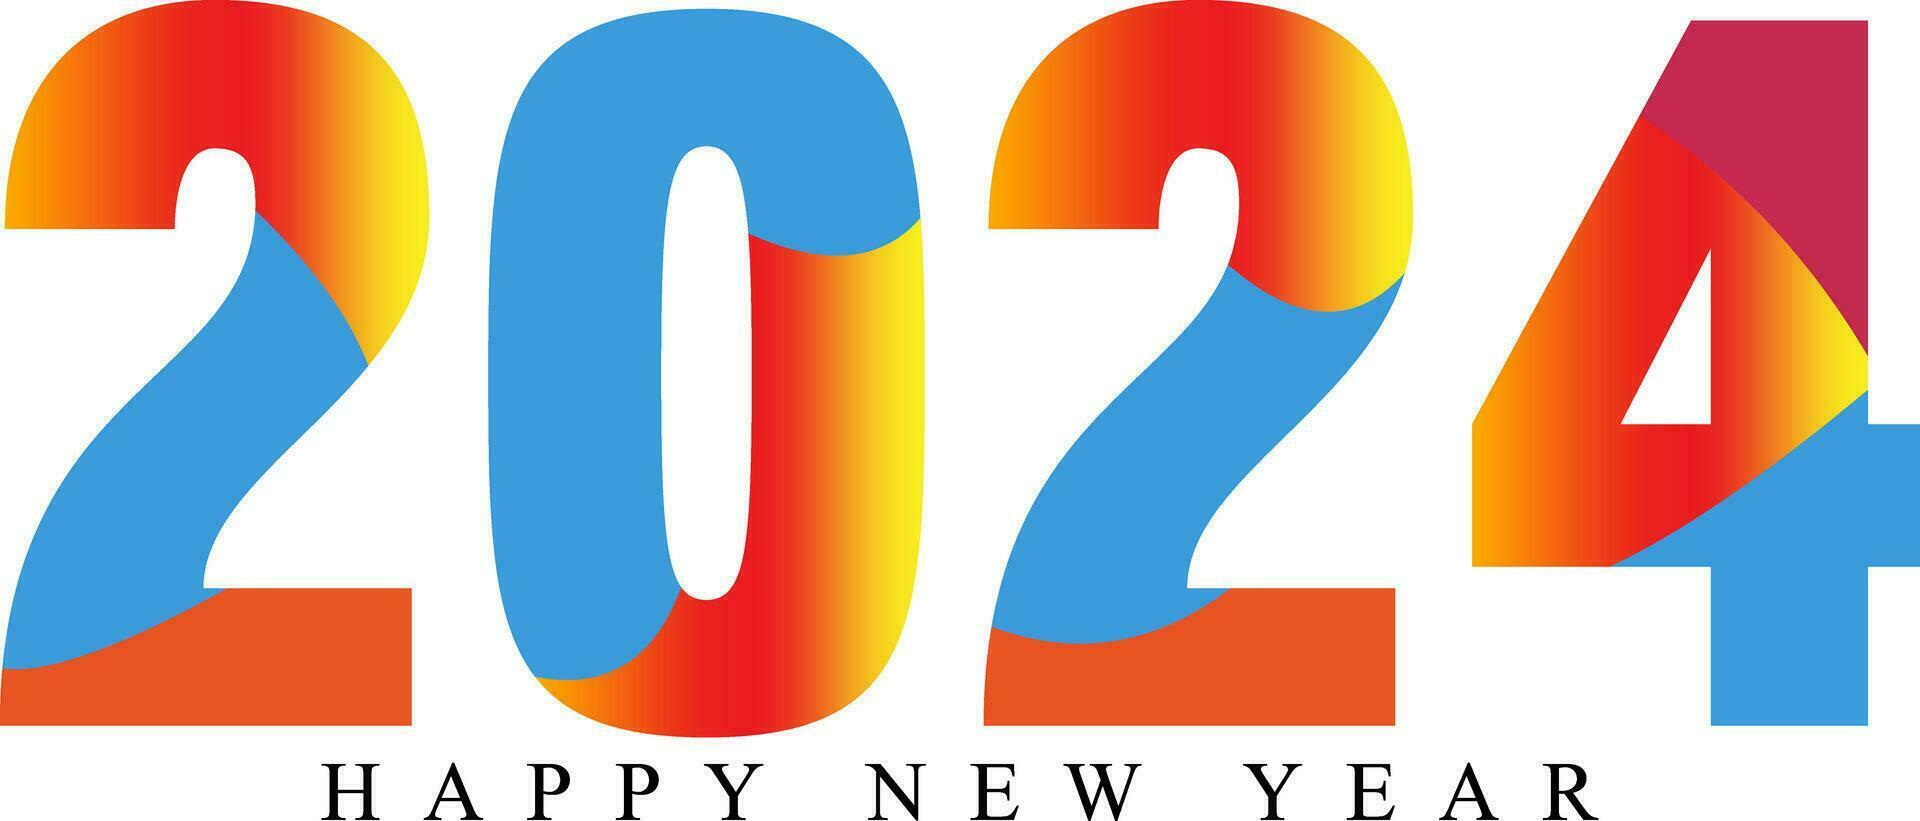 Happy new year 2024 design with numbers. happy new year 2024 vector design for poster, calendar, banner and more